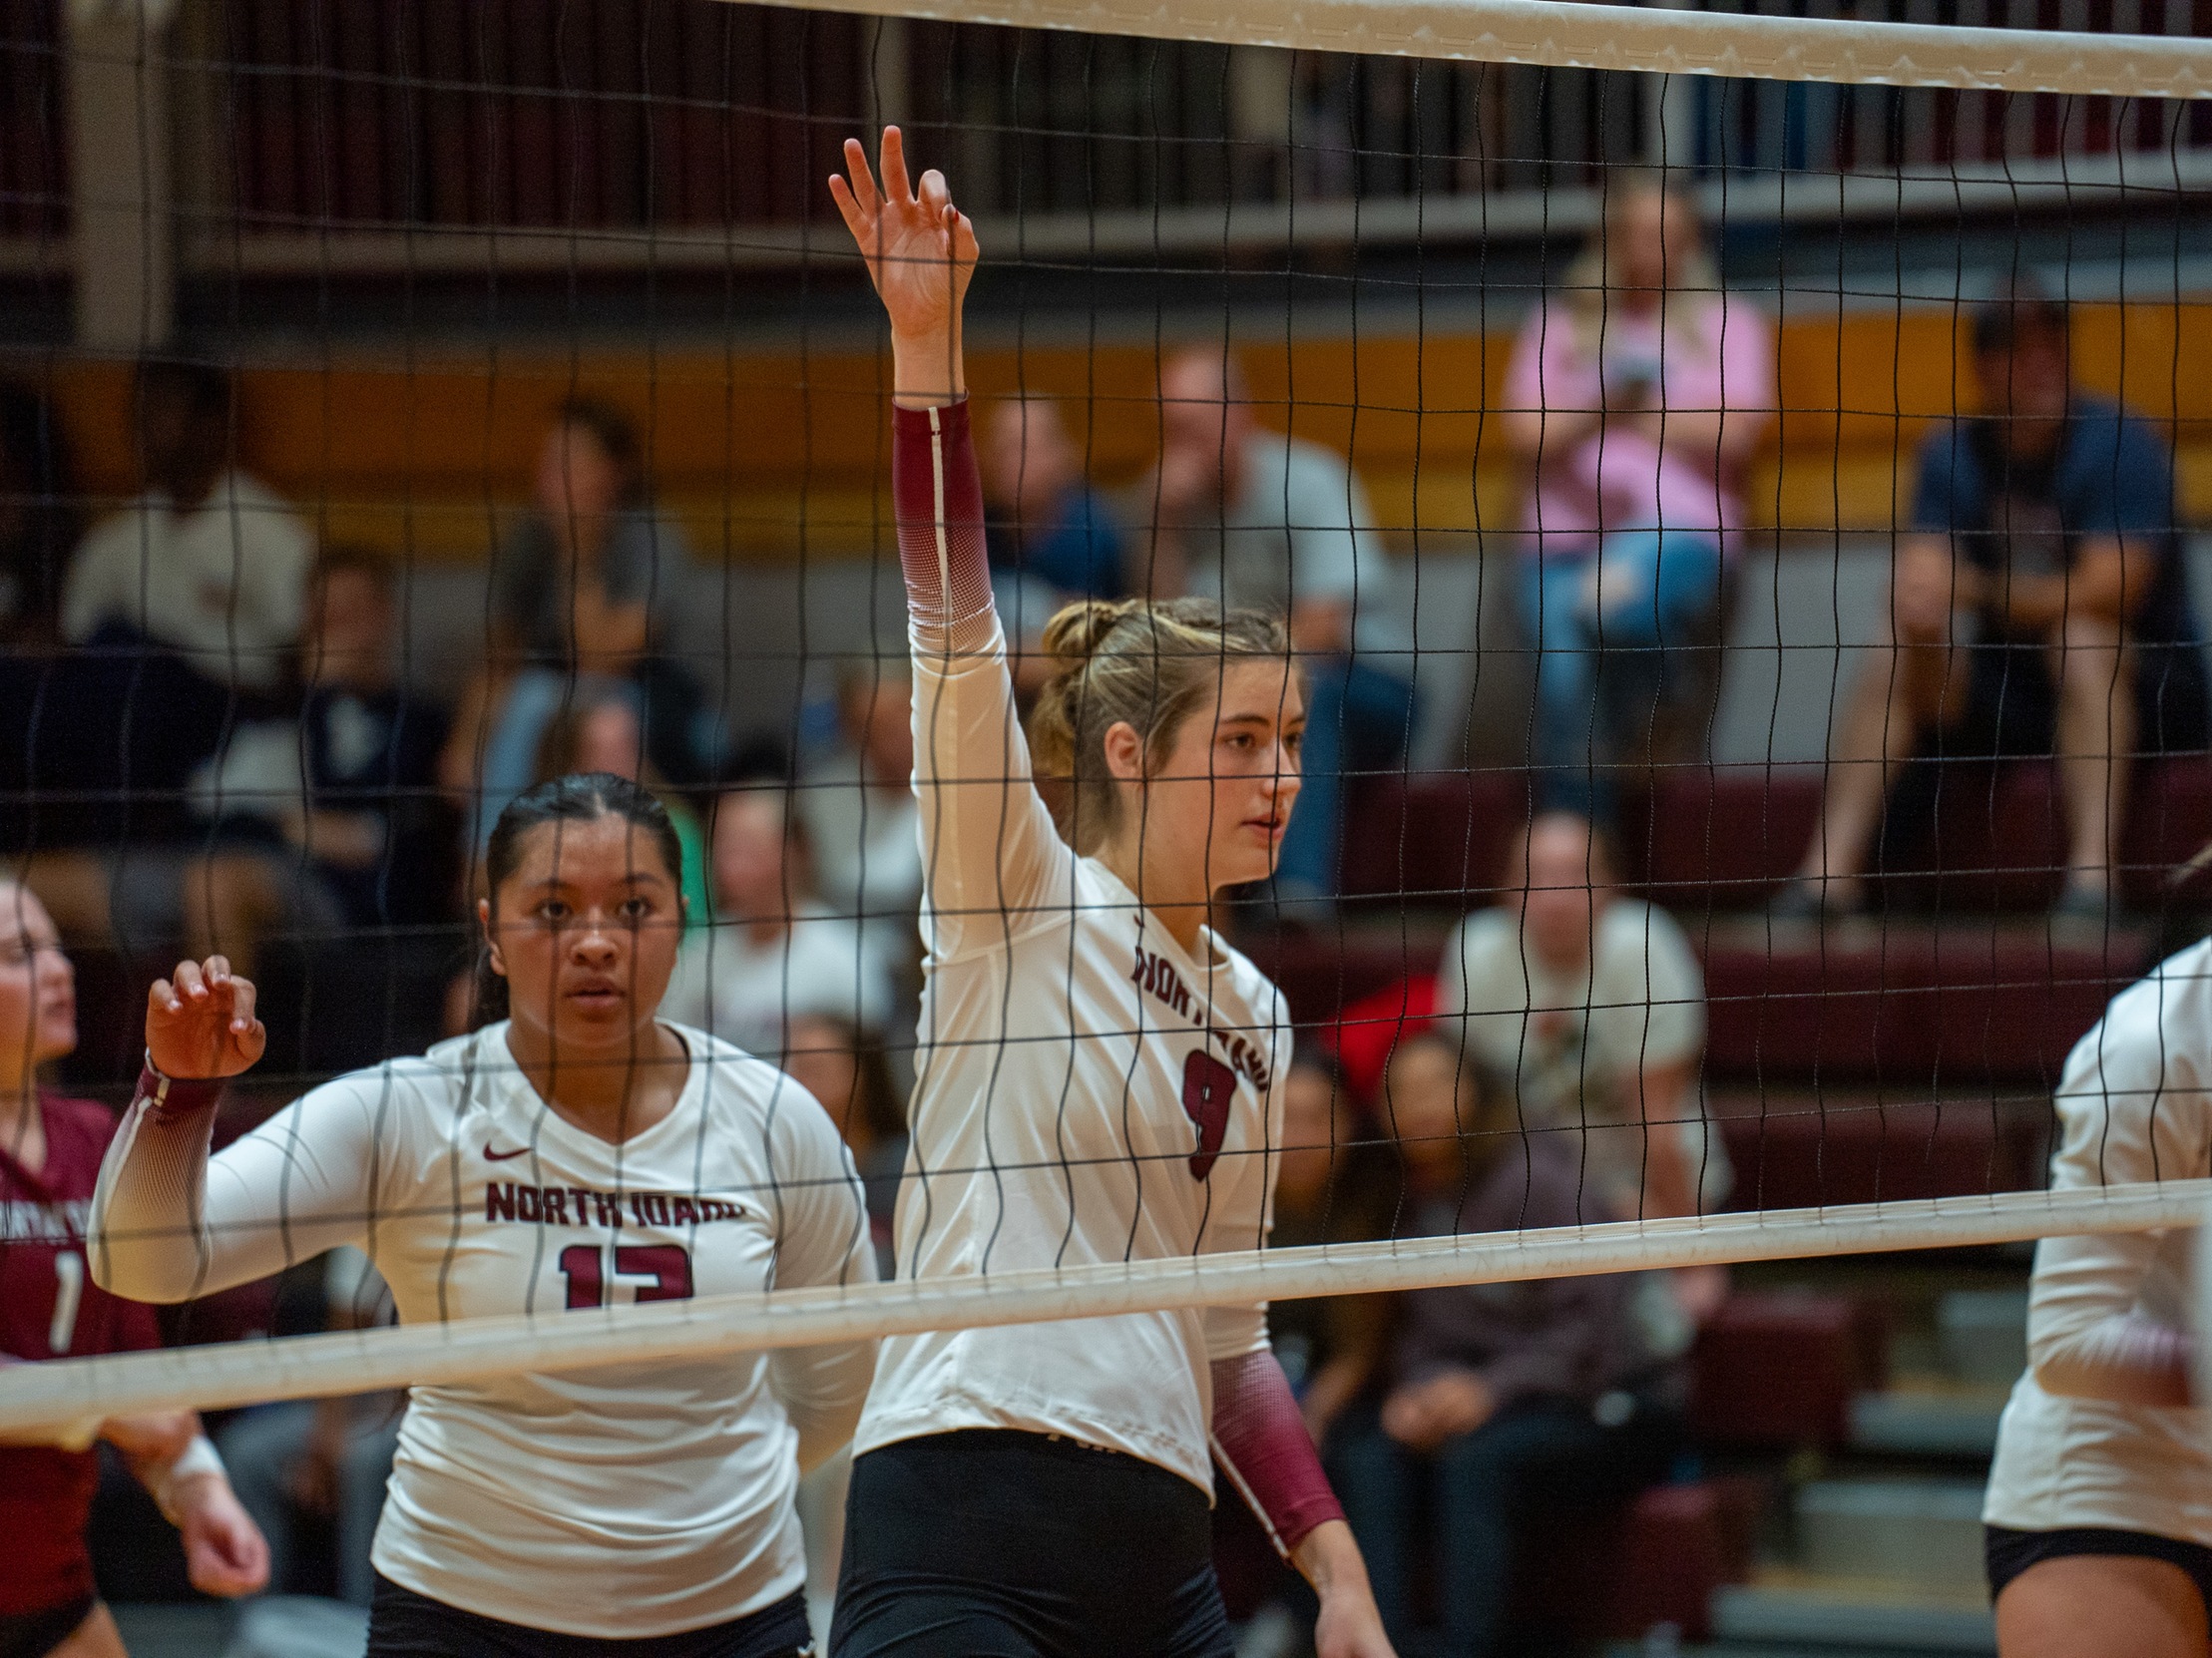 North Idaho Women's Volleyball takes two to open at Bellevue tourney